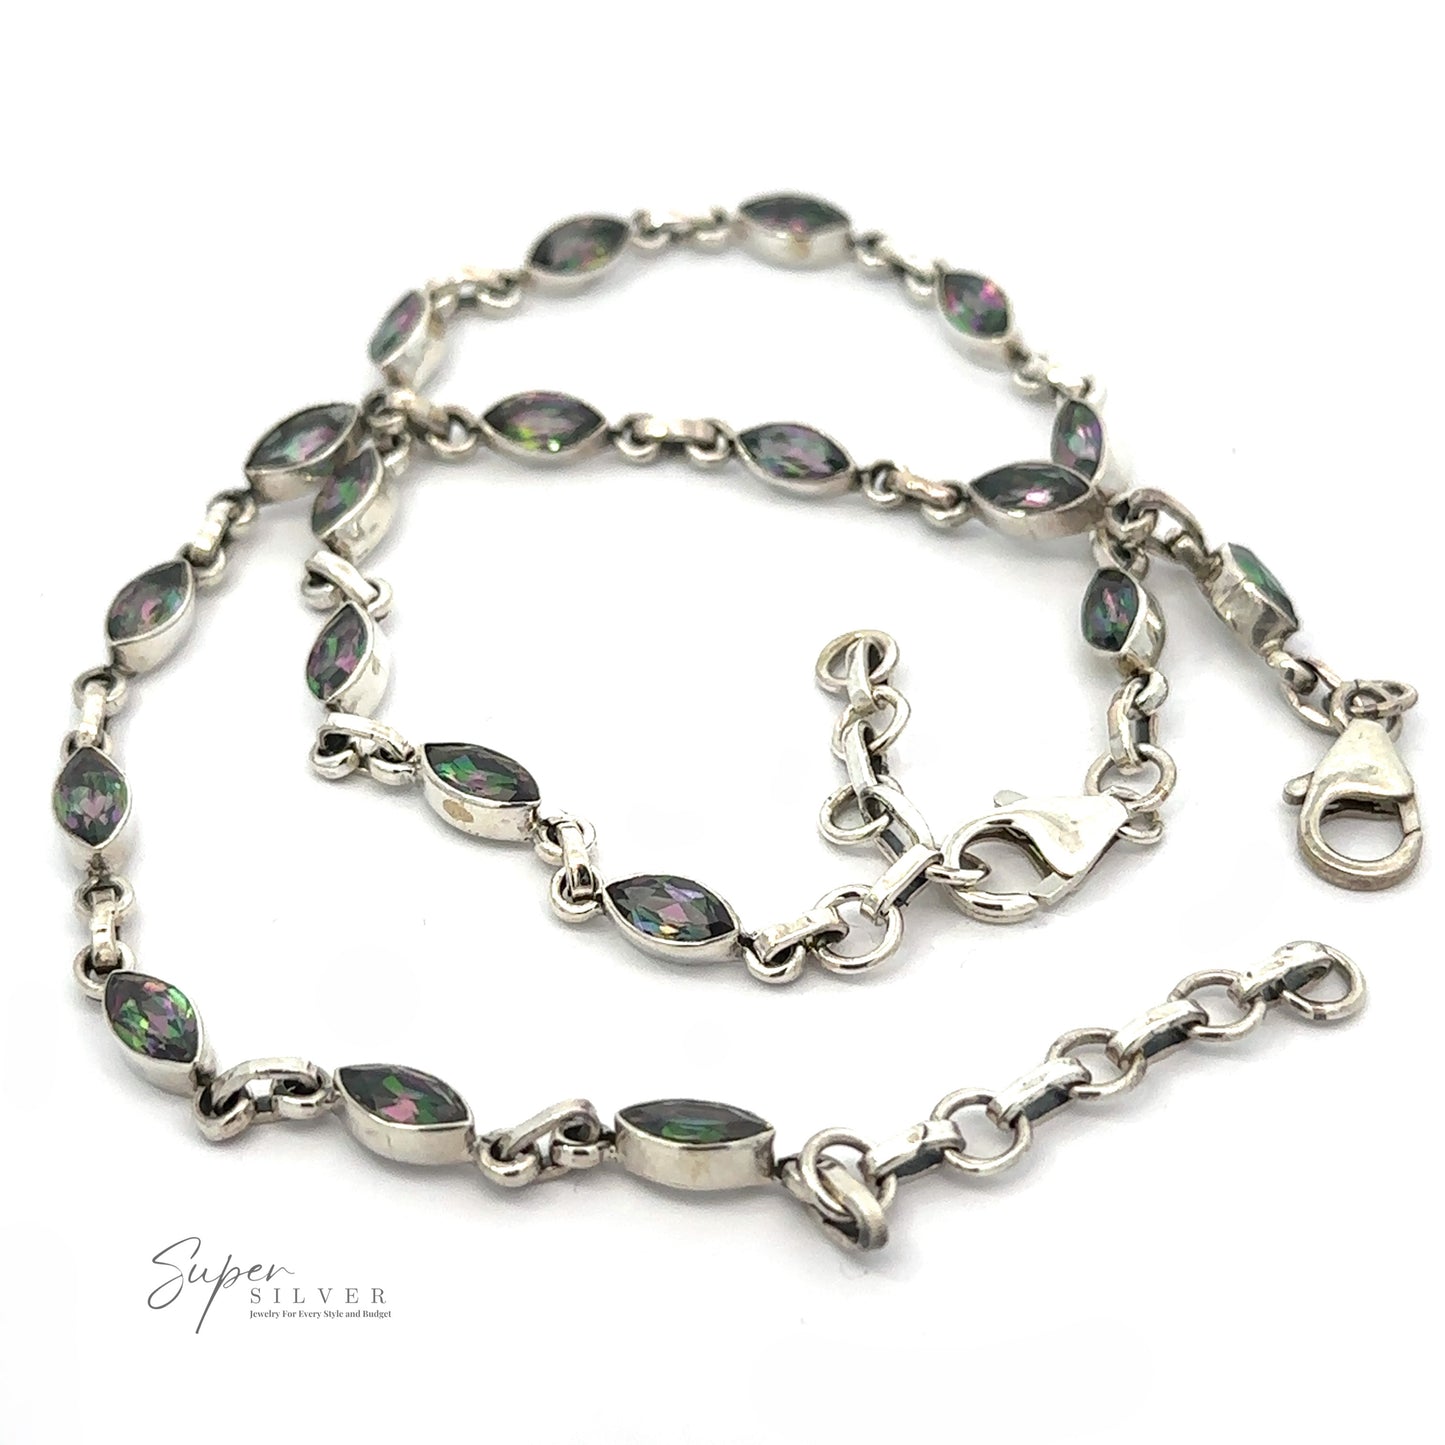 
                  
                    A sterling silver chain bracelet with marquise-shaped, multicolored gemstones and a lobster clasp. The Rainbow Mystic Topaz Marquise Link Bracelet features enhancing links between the stones. The branding 'Super Silver' is visible in the corner.
                  
                